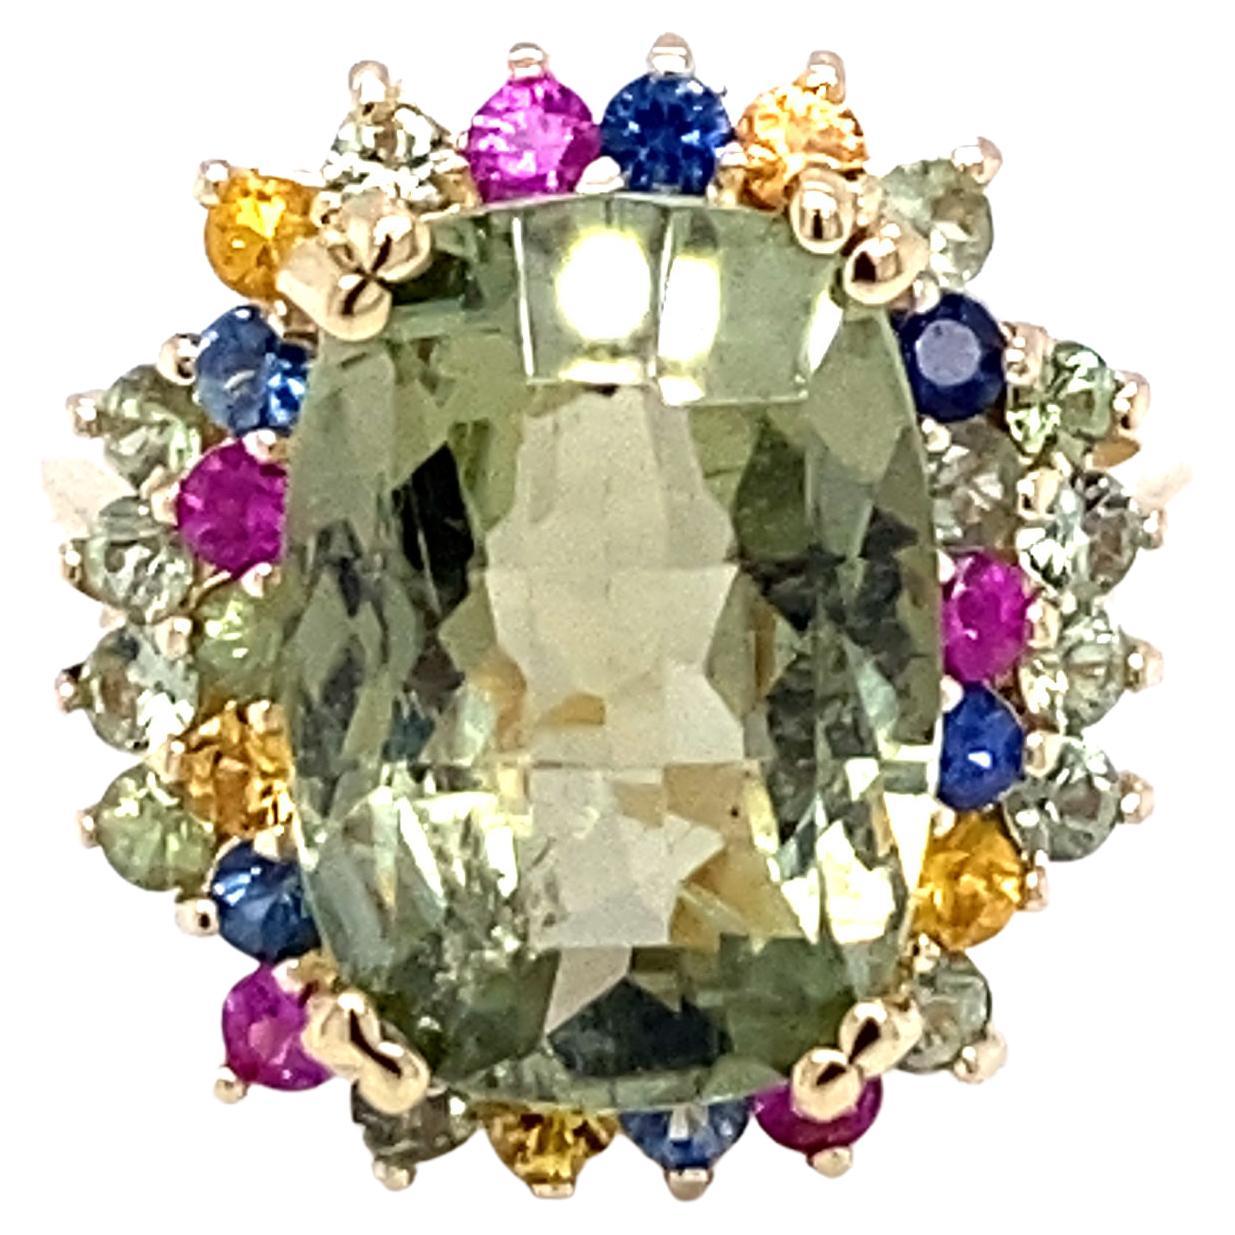 7.42 Carat Tourmaline Multi-Sapphire Yellow Gold Cocktail Ring

This Ring has a Cushion Checkered Cut Green Tourmaline that weighs 6.09 Carats and 32 Multi Sapphires that weigh 1.33 Carats. 
The Total Carat Weight of the Ring is 7.42 Carats. 
This